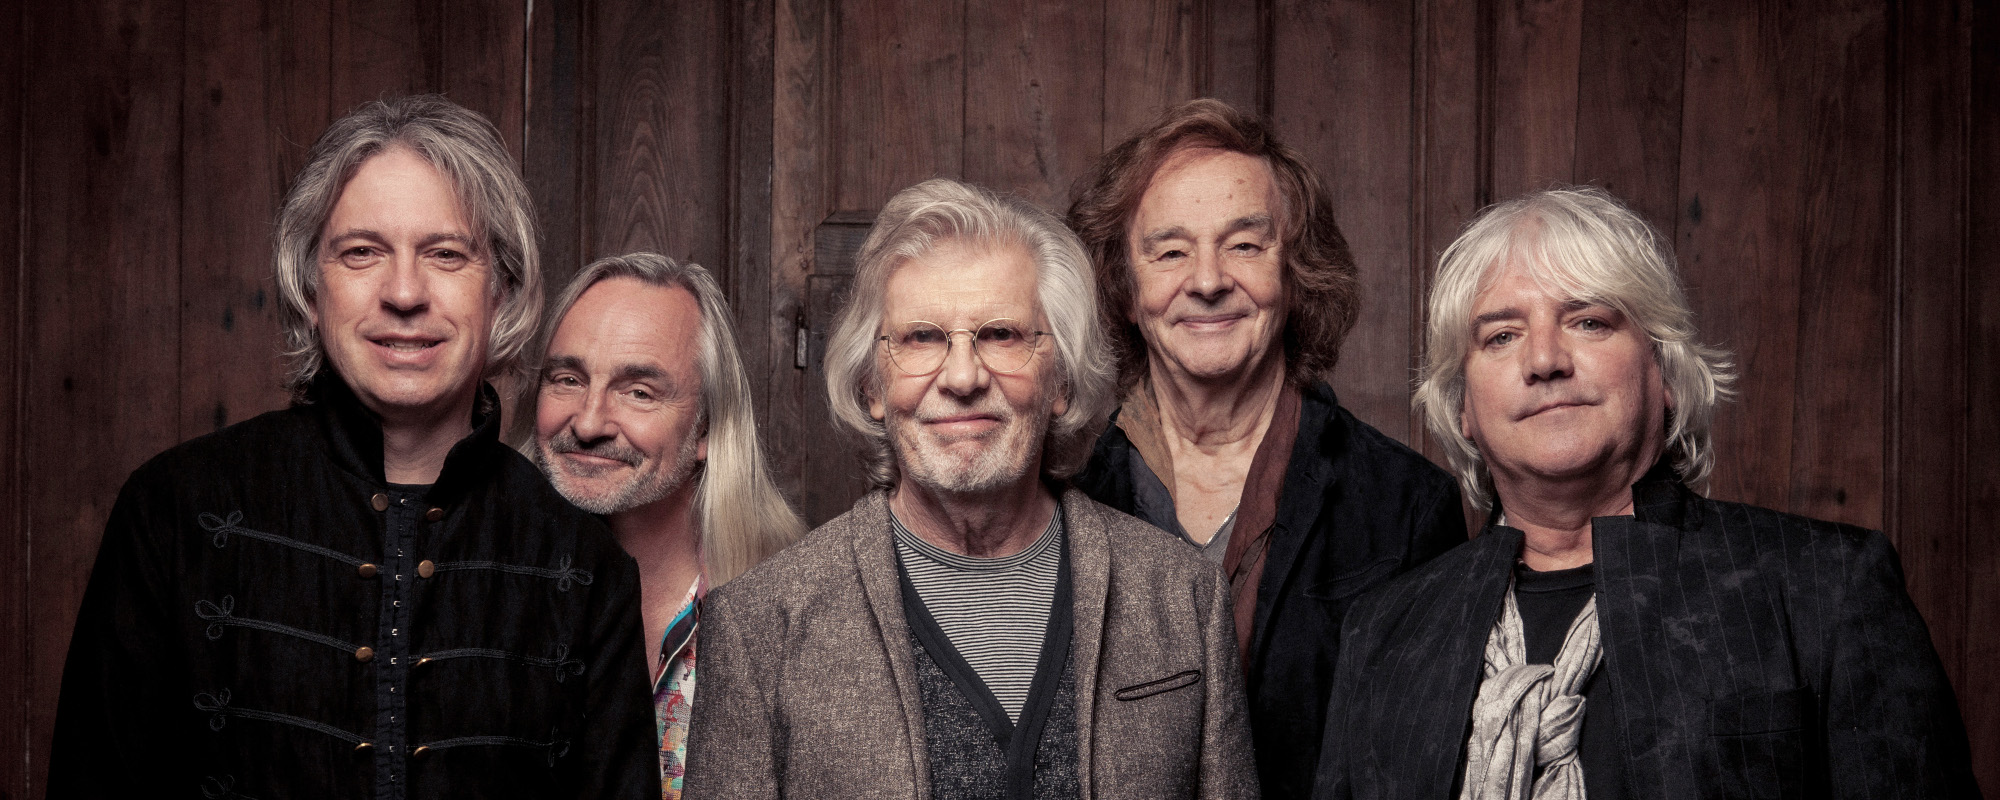 The Zombies Cancel Remaining U.S. Tour Dates Following Band Member’s Hospitalization